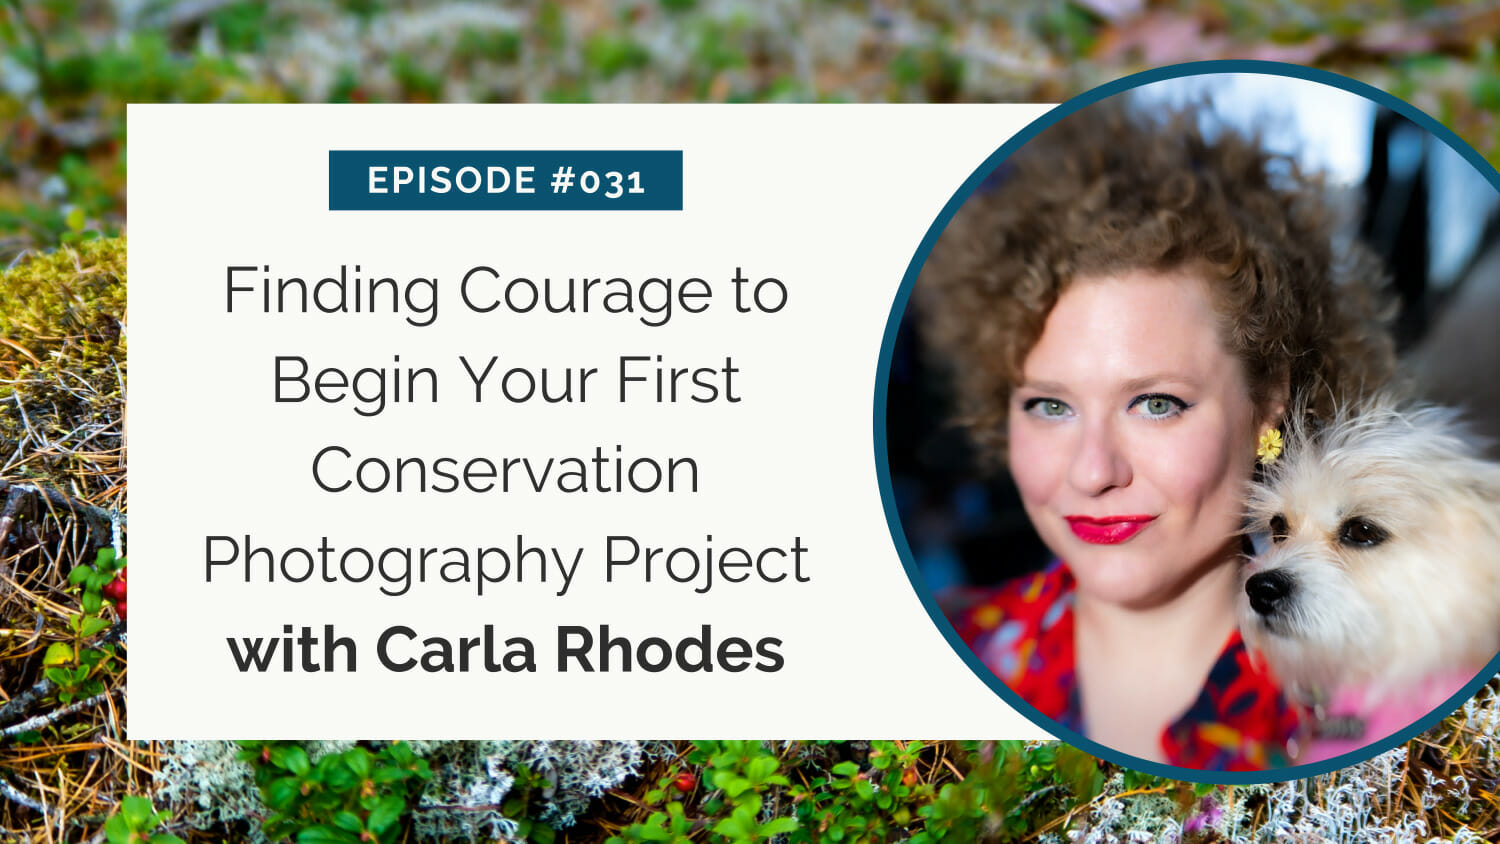 Podcast episode graphic featuring carla rhodes discussing the start of a conservation photography project, with an inset portrait of her and a small white dog.